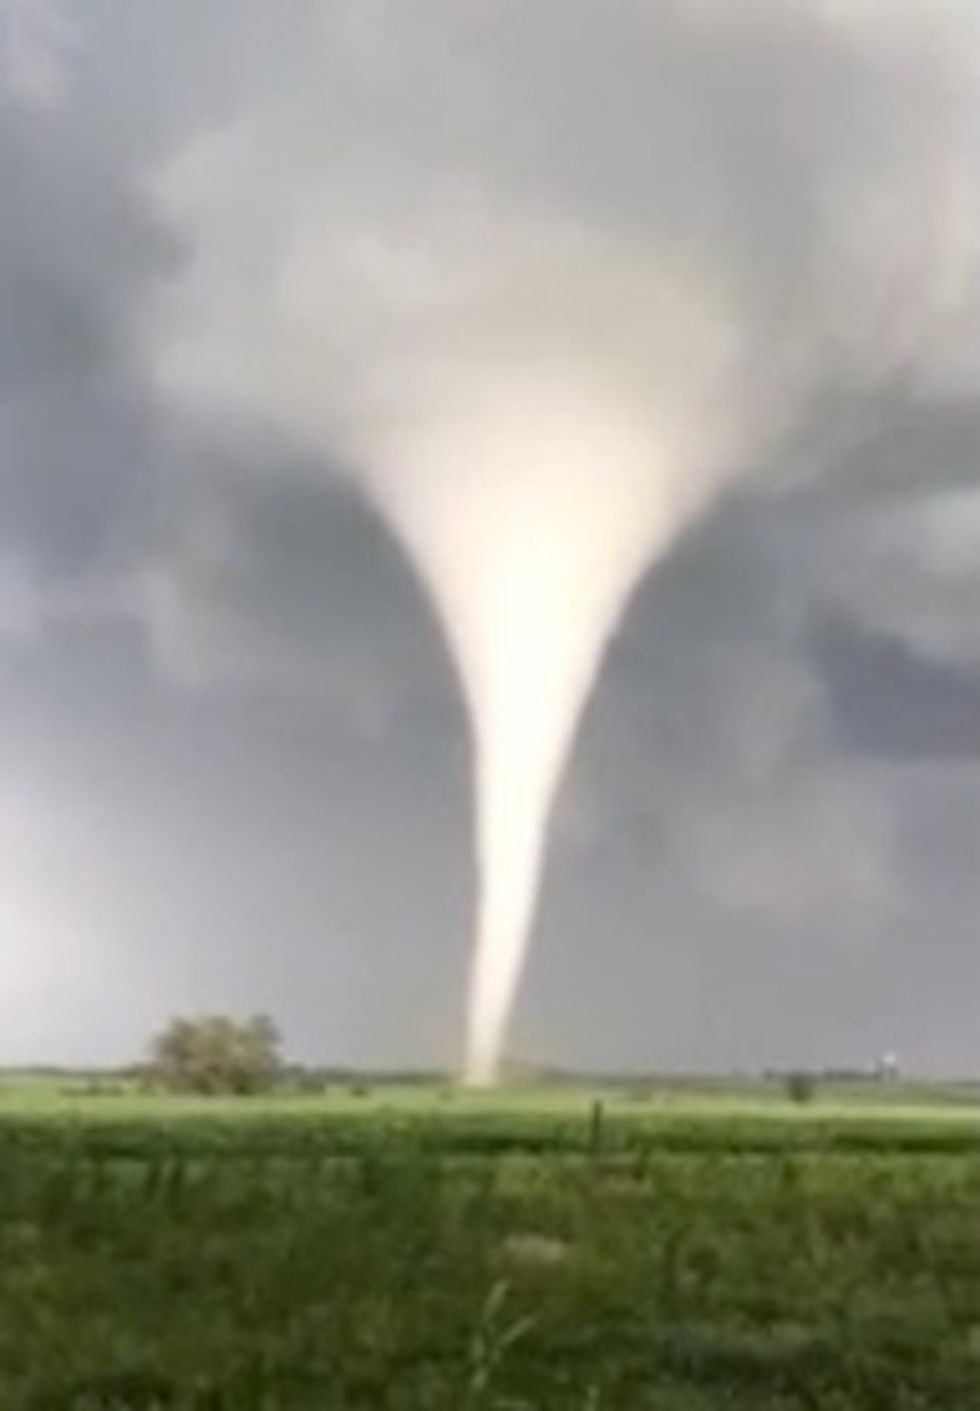 Family Witnesses 'Humongous' Ghost-White Tornado Tearing Across Iowa Field: ‘There Goes the Barn!\